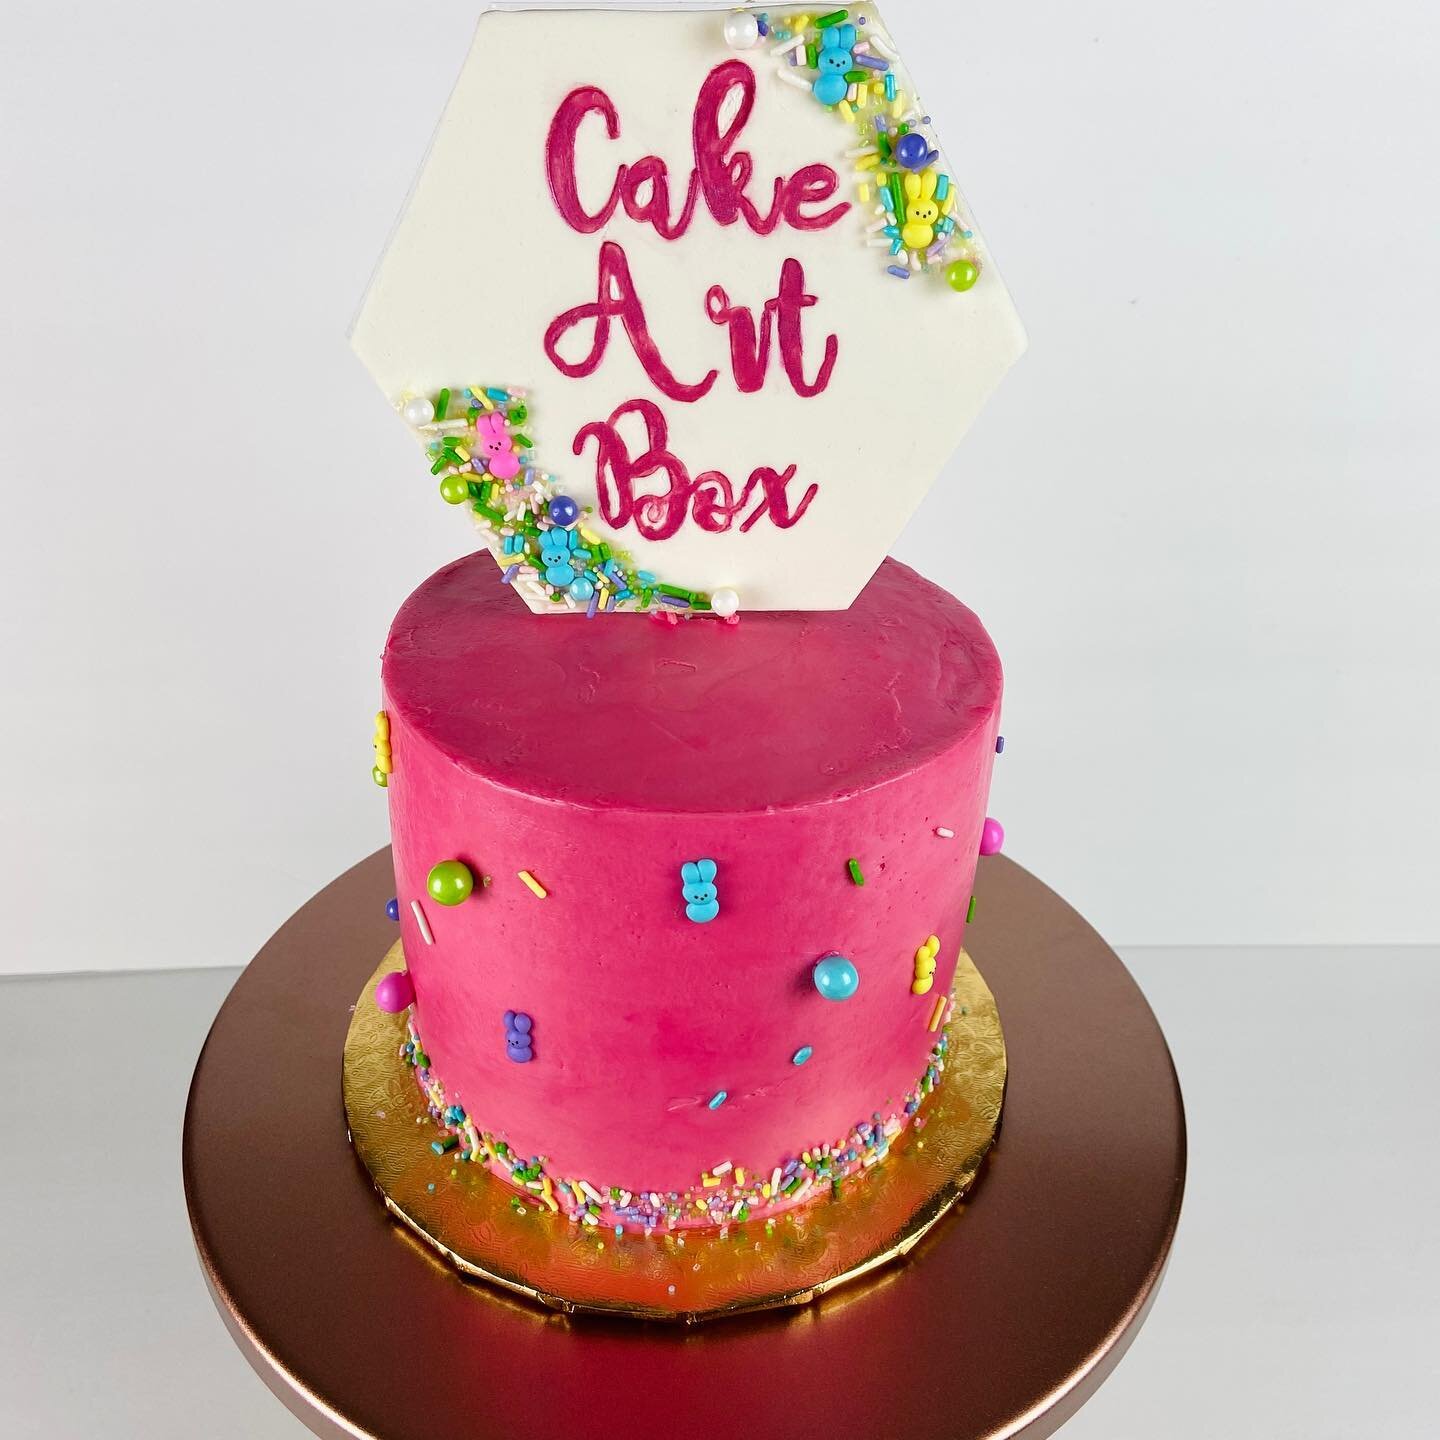 Mark your Calendar! Spring @cakeartbox is coming this Saturday 02.22.20 @2pm PST.